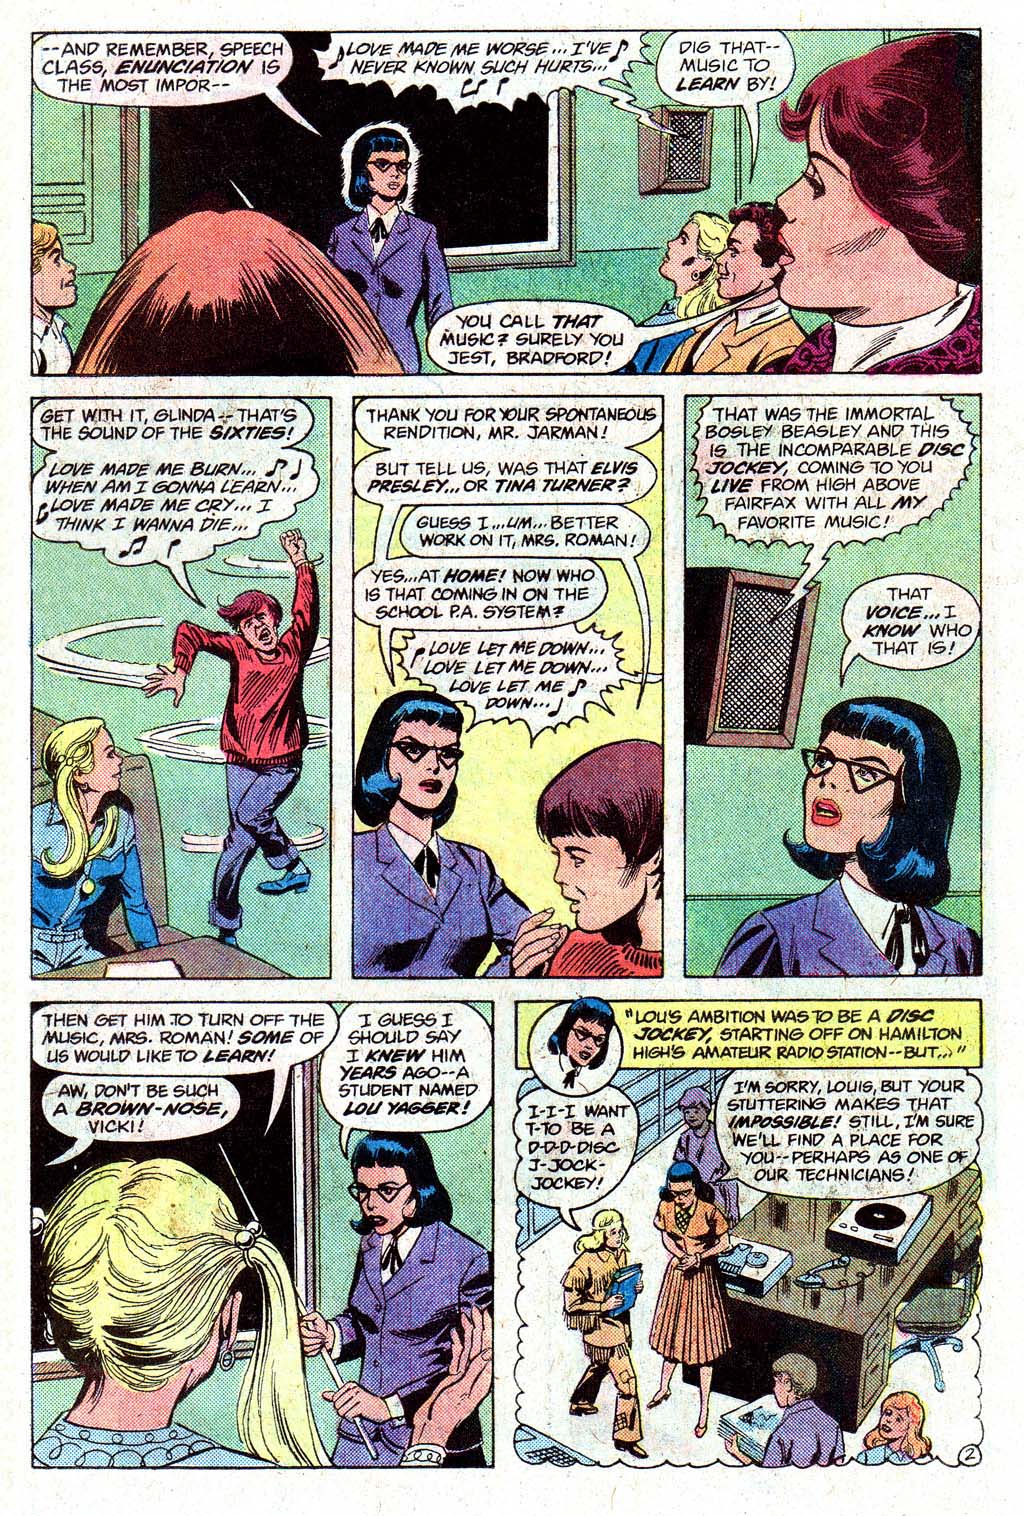 The New Adventures of Superboy 29 Page 25